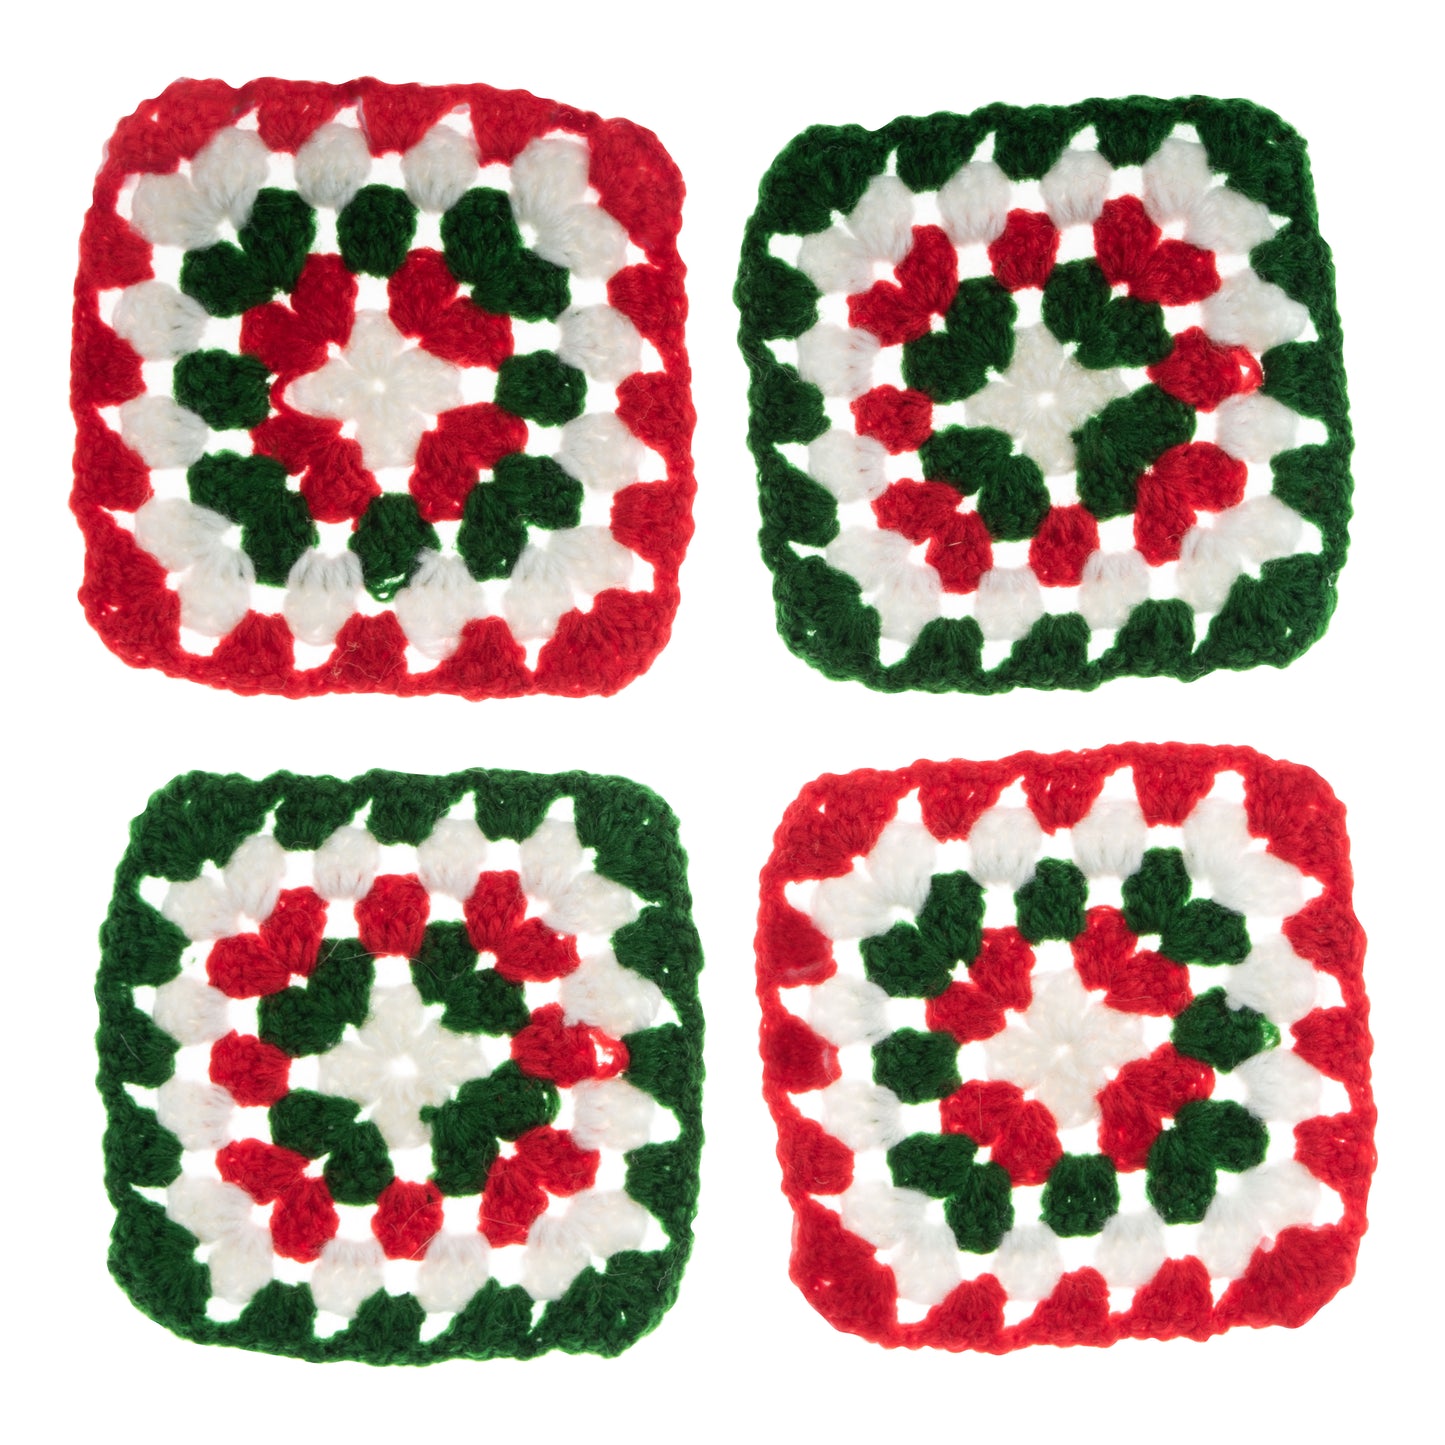 MY FIRST CROCHET KIT - GRANNY SQUARES - Festive Colours